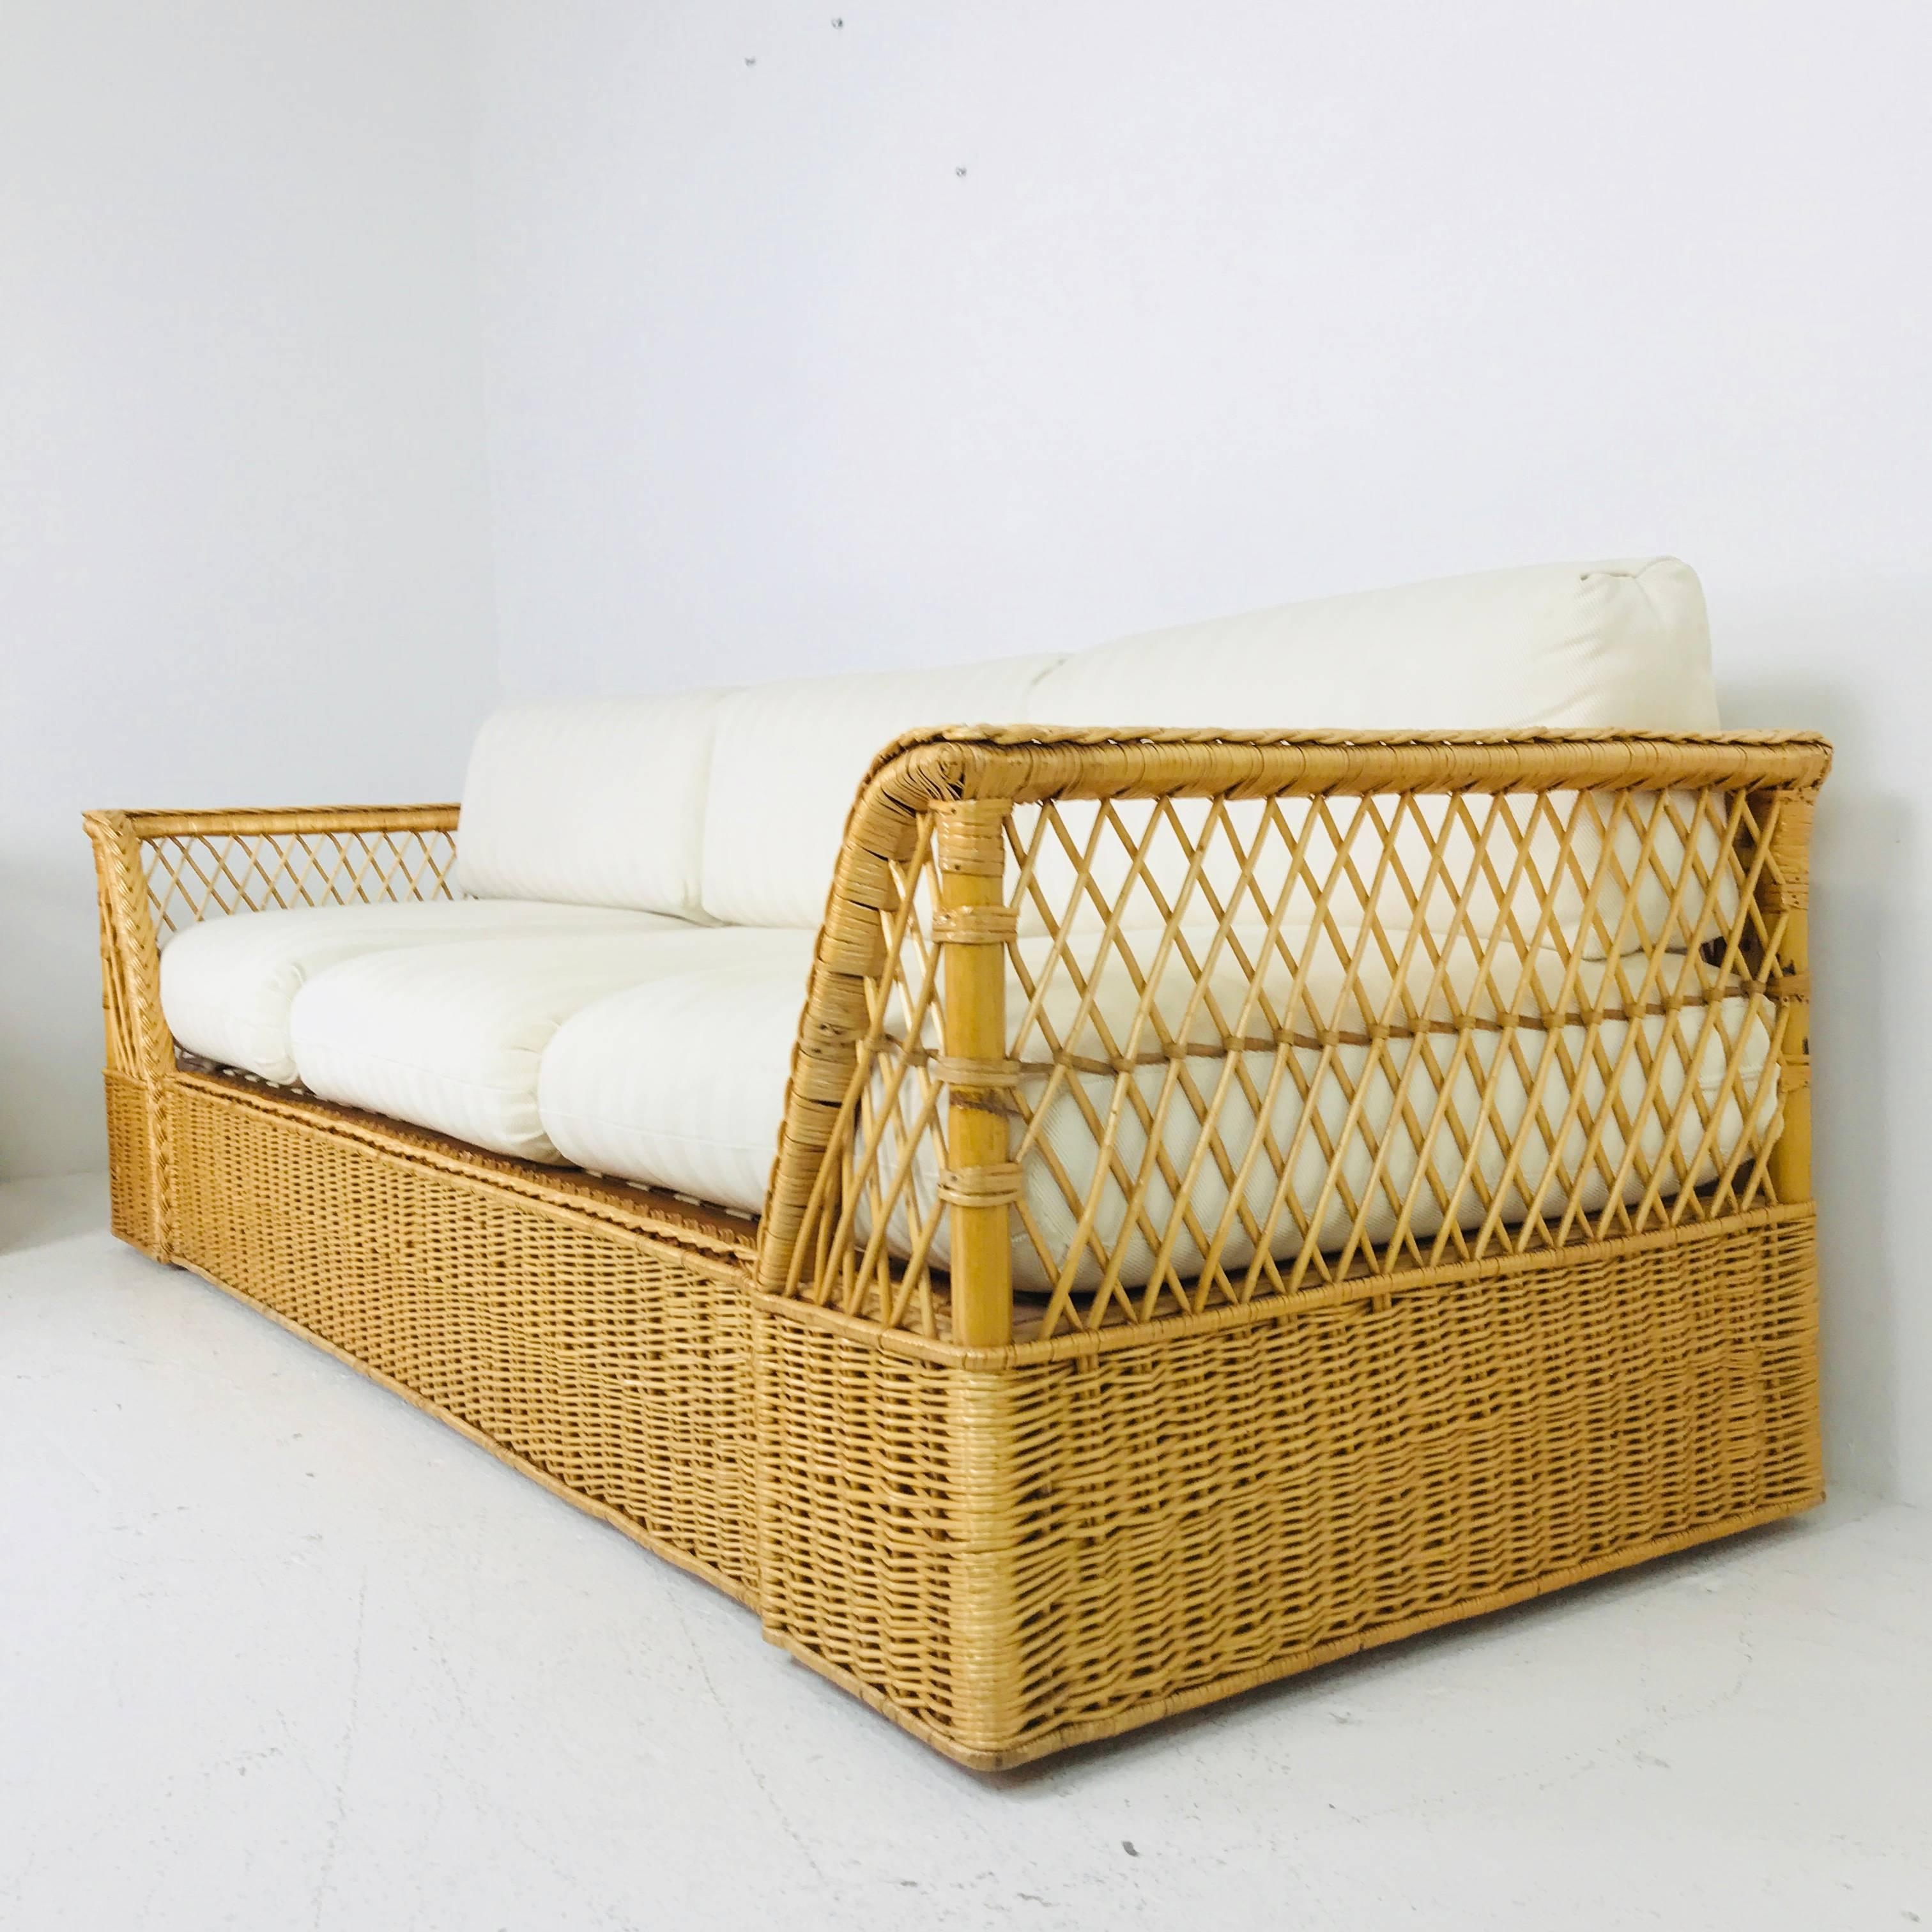 Rattan Sofa with Upholstered Cushions by McGuire. In good vintage condition with minor repairs.

see our other listing for the chair

dimensions: 92